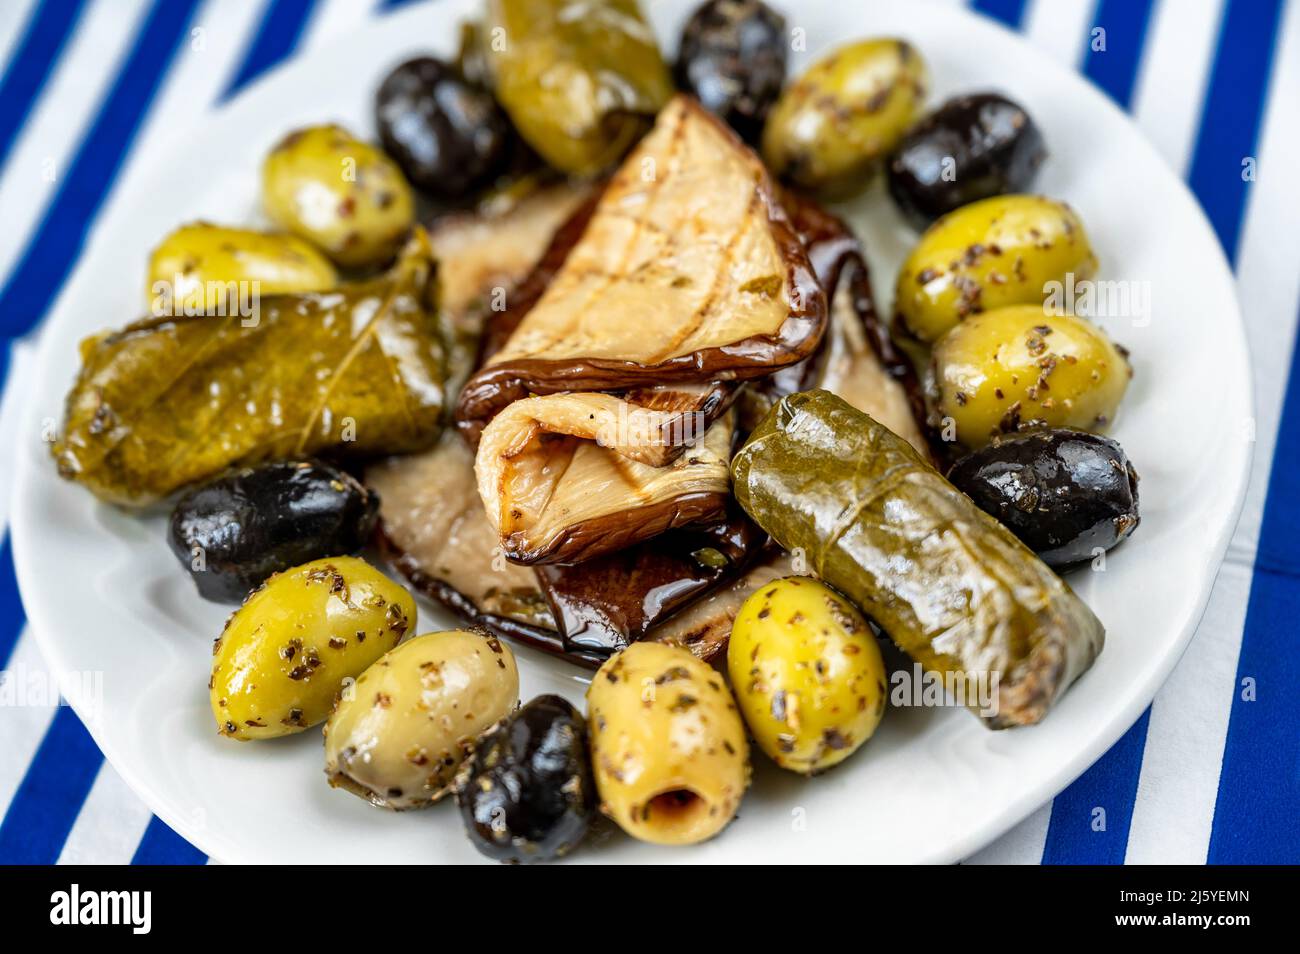 Greek appetizer plate with olive, sliced eggplant and dolmades (vine leaf stuffed with rice) on plate on blue striped towel, closeup. Stock Photo